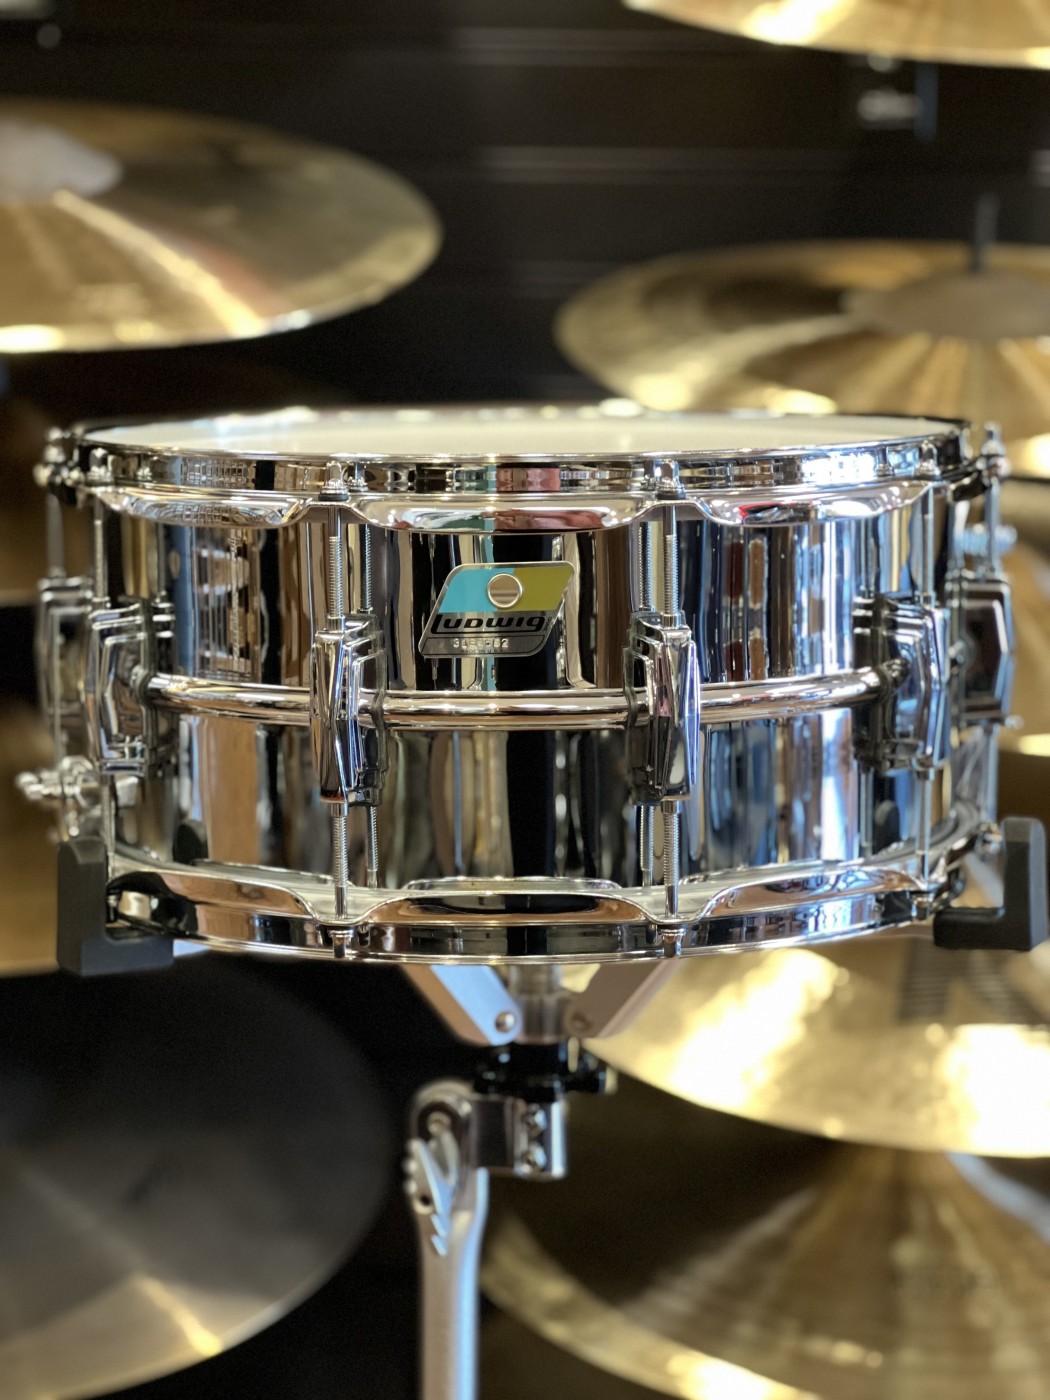 Ludwig Performance Marching Multi Toms - 6-/8-/10-/12-/13-/14-inch